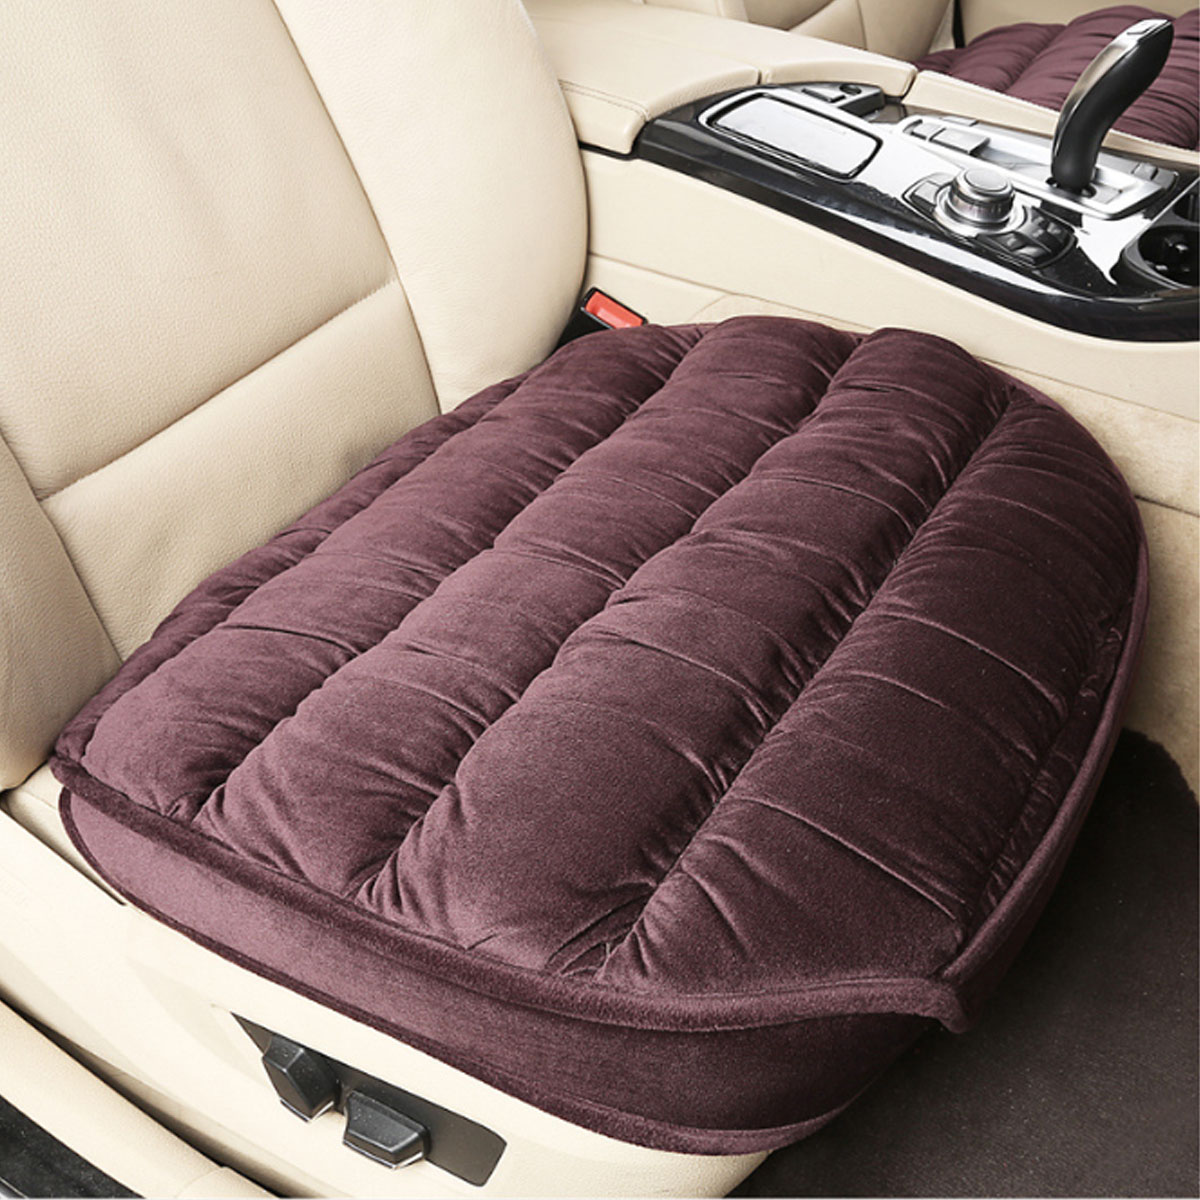 Universal-Car-Front-Seat-Cover-Soft-Plush-Breathable-Pads-Winter-Chair-Cushion-1628307-6